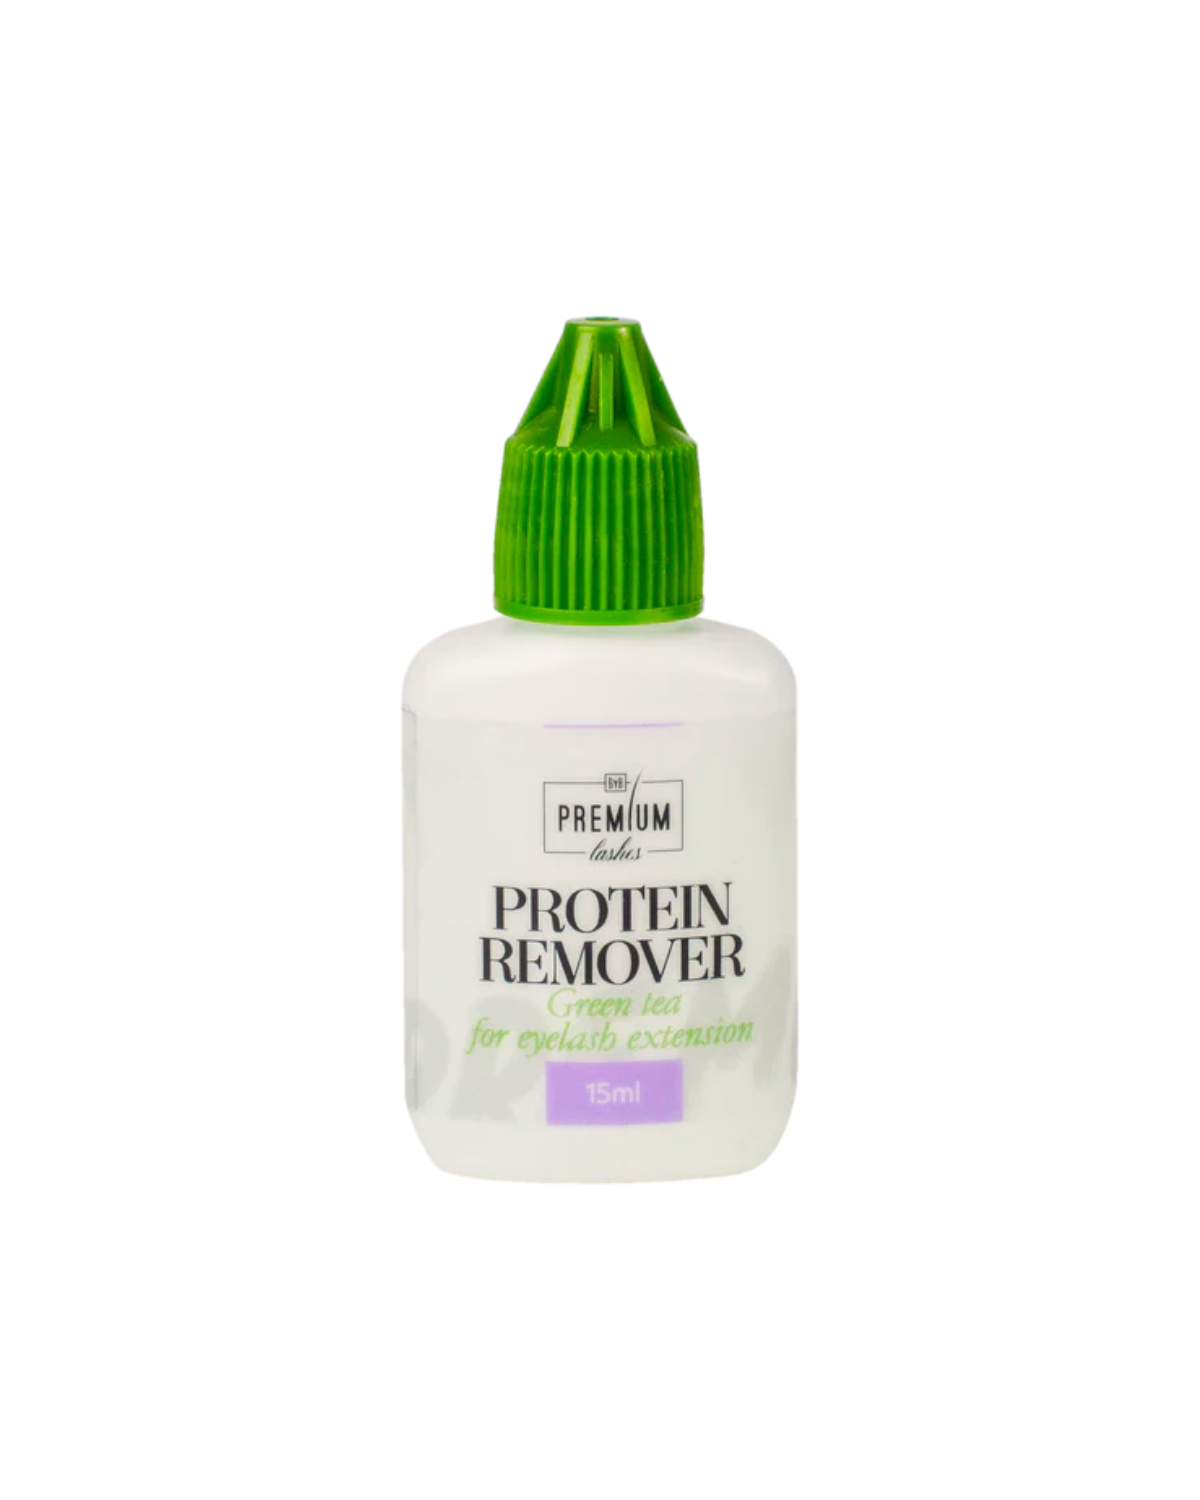 PROTEIN REMOVER